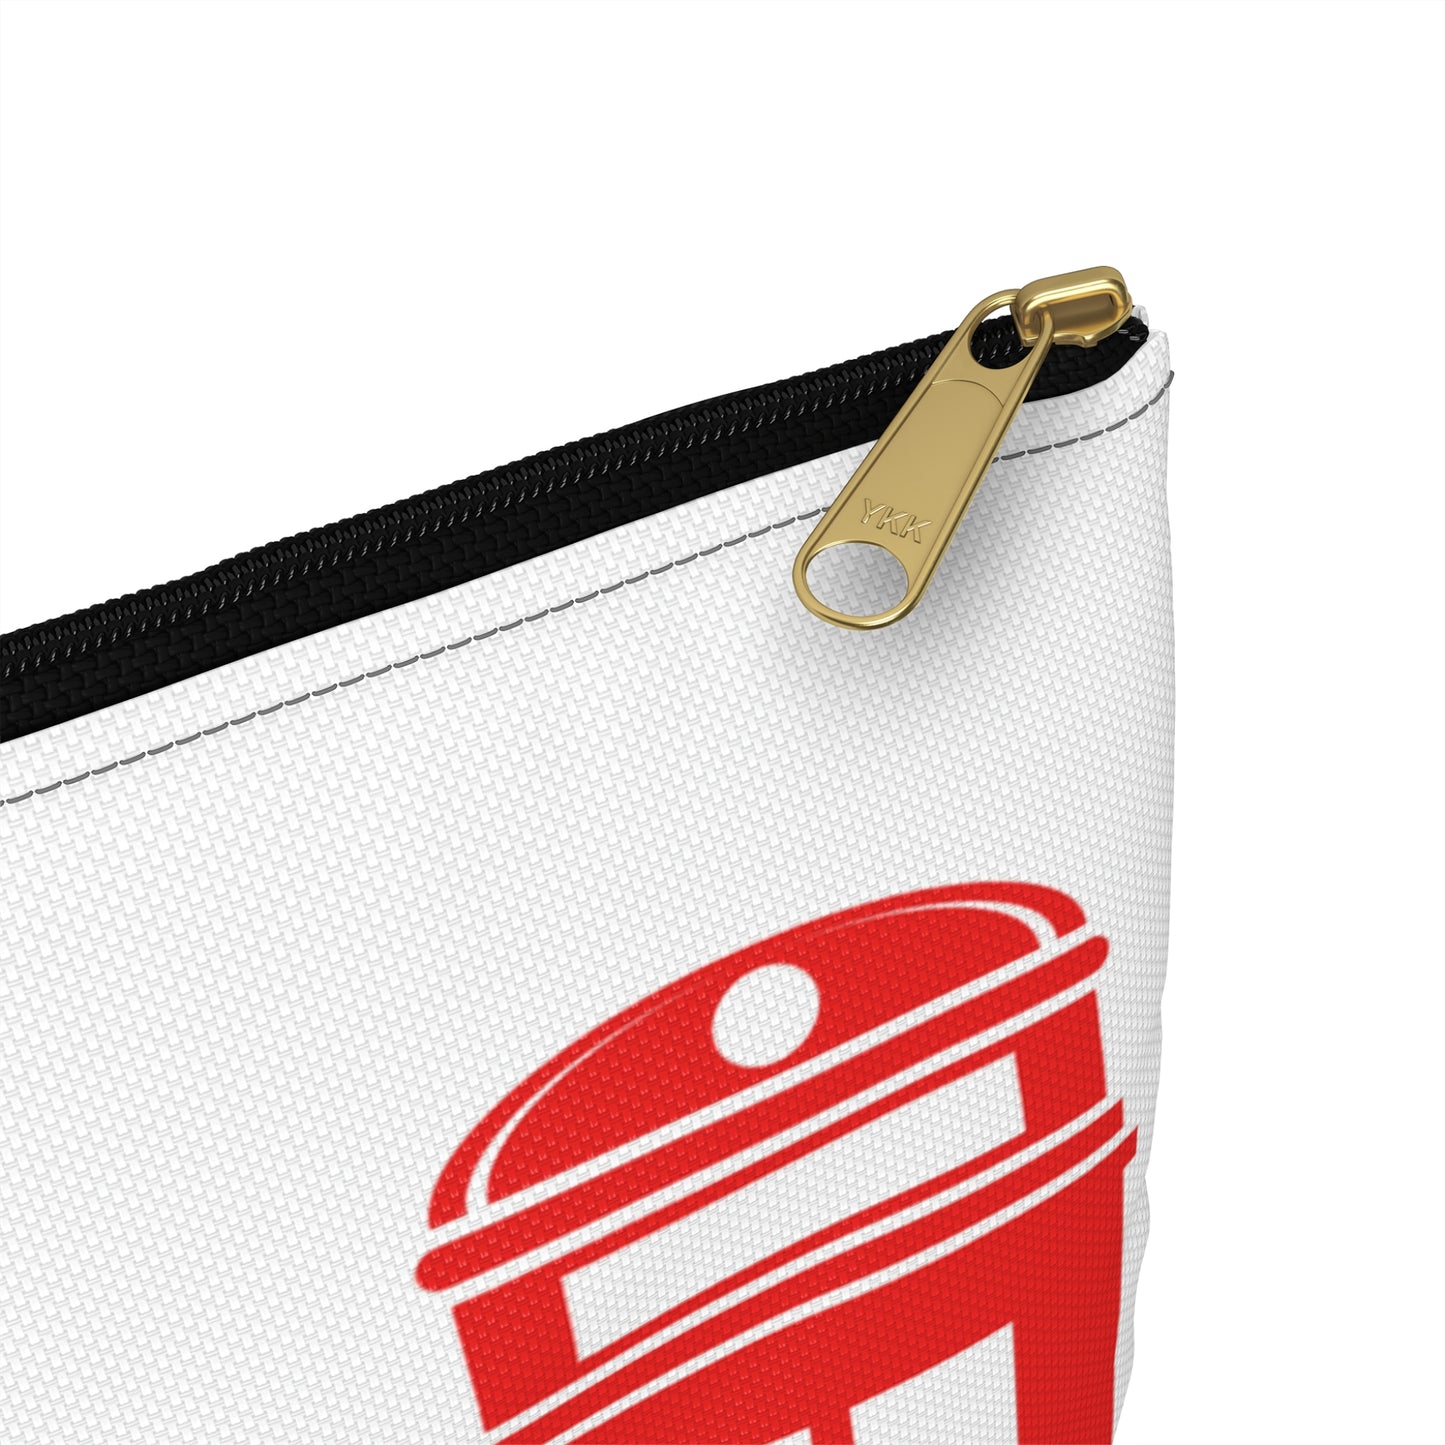 London Accessory Pouch, Phone Booth